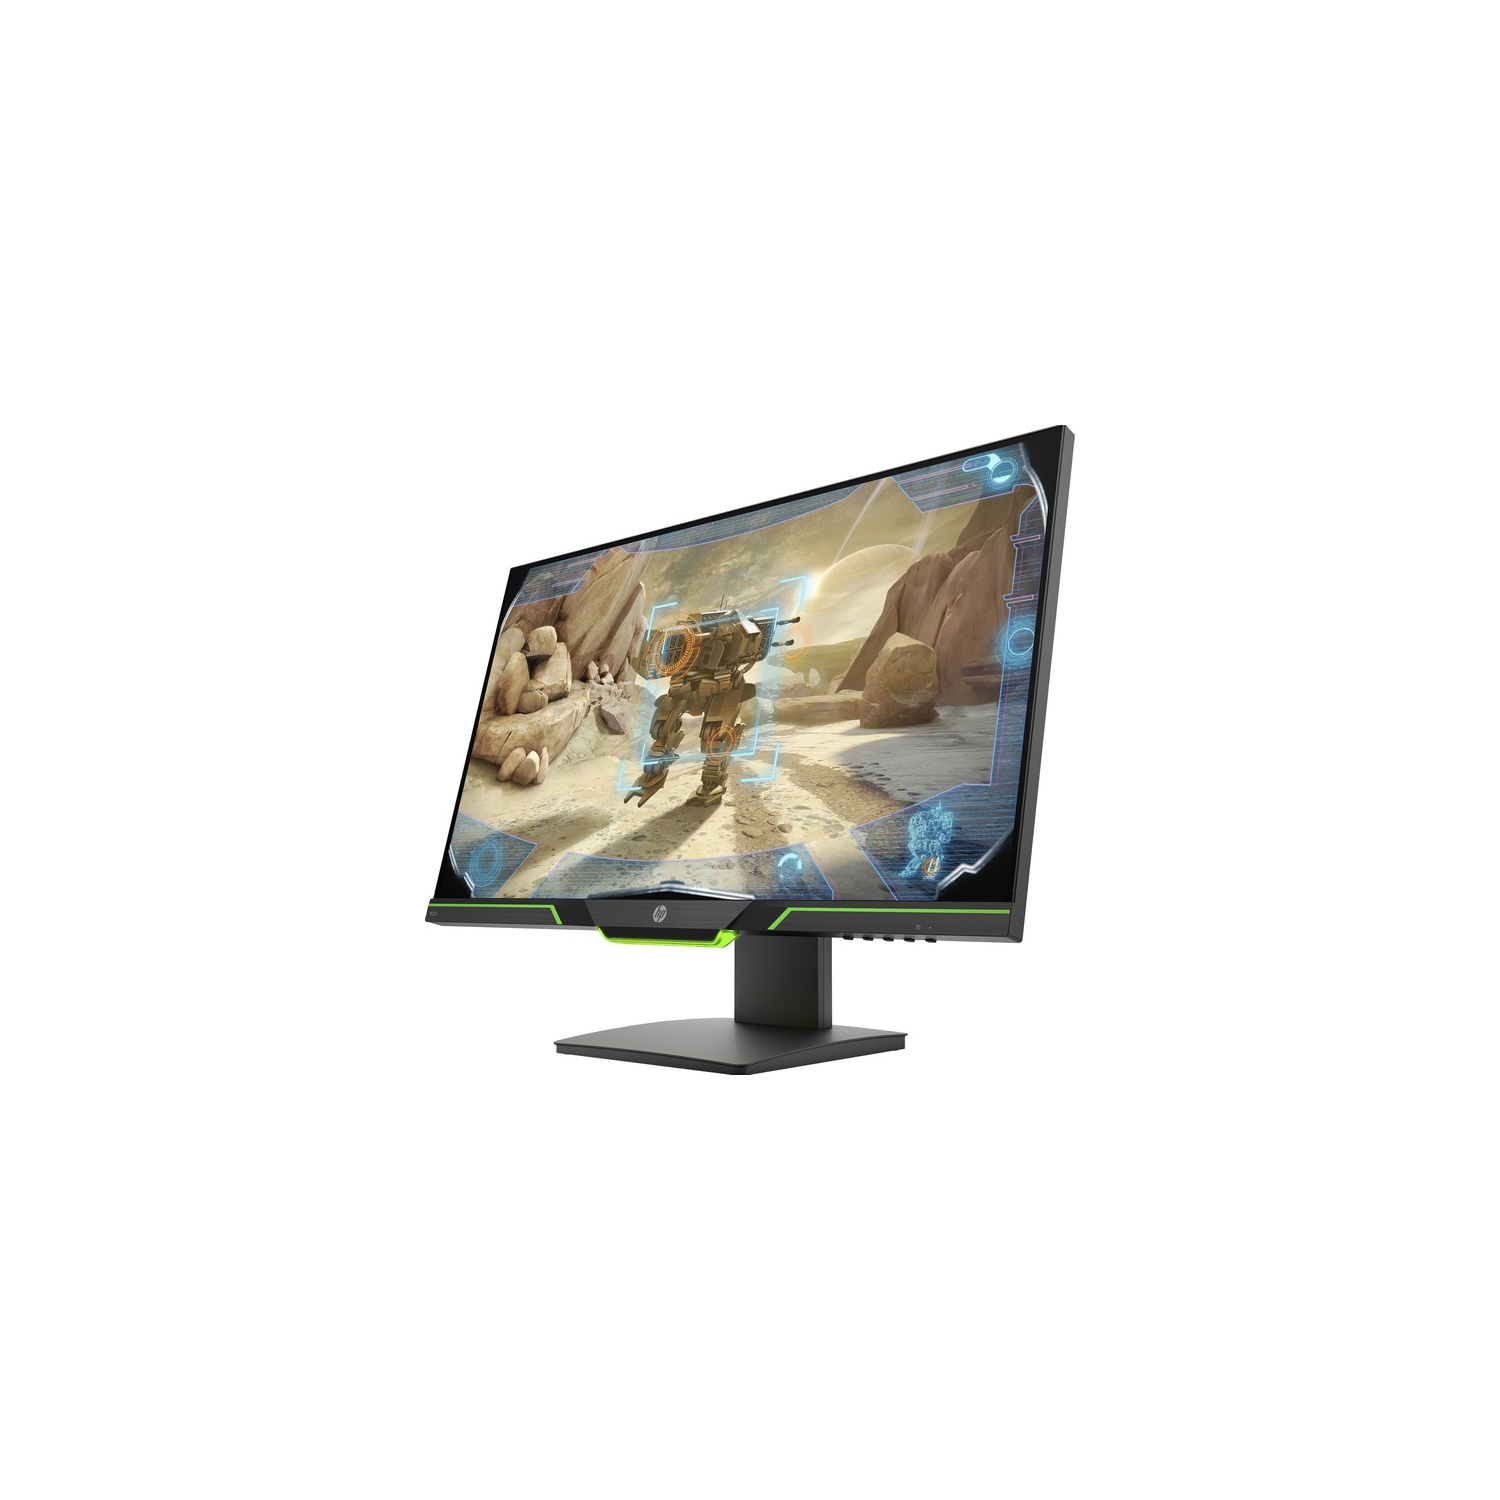 HP X27i 27" WQHD LED Gaming LCD Monitor - 16:9 - 27" Class - In-plane Switching (IPS) Technology - 2560 x 1440 - FreeSync - 350 Nit - 4 ms GTG - 144 Hz Refresh Rate - HDMI